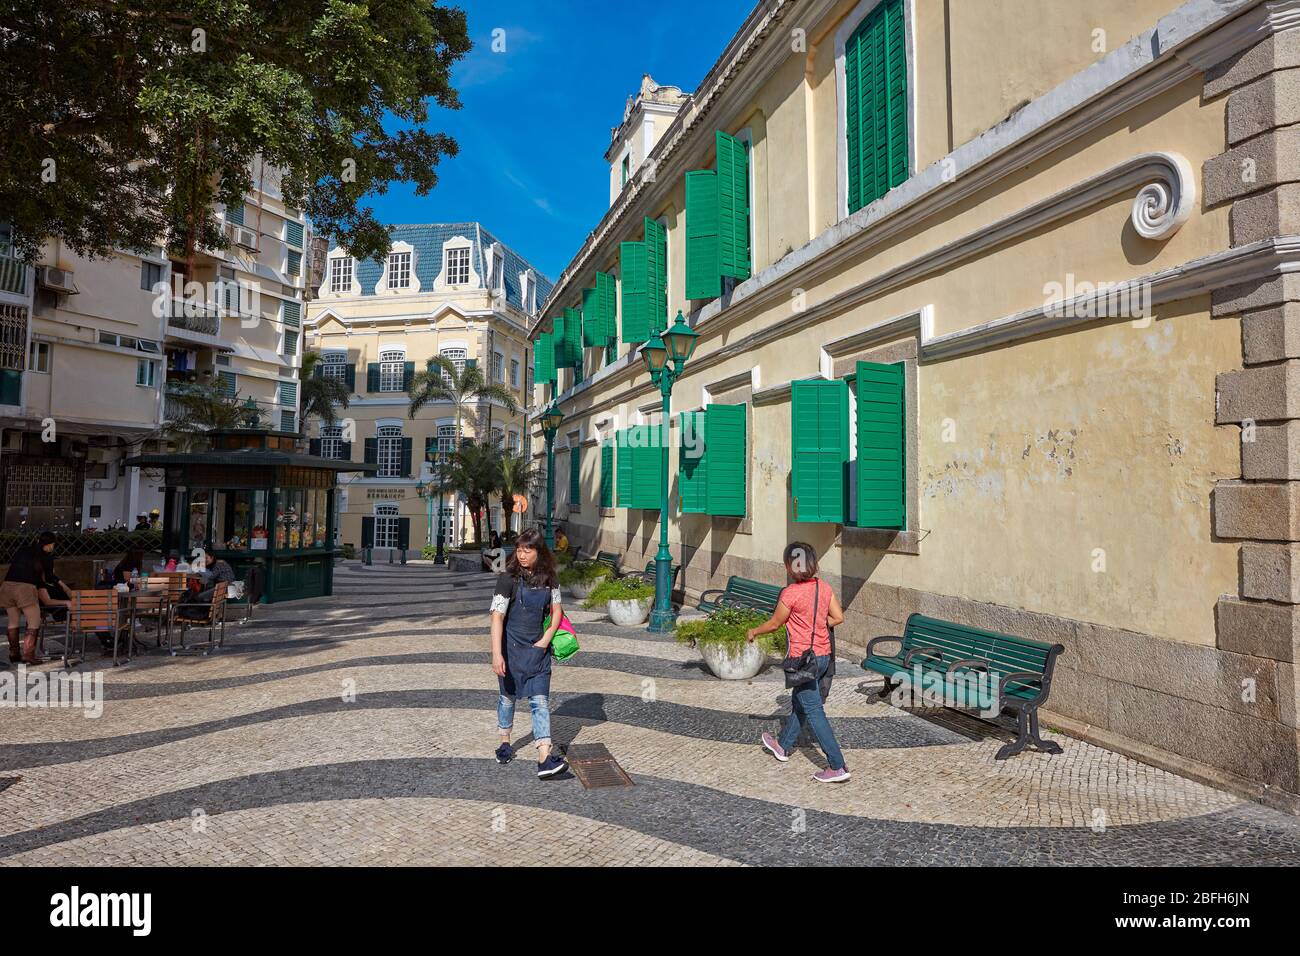 People walking on a narrow pedestrian cobblestone street in the historic district of Macau, China. Stock Photo